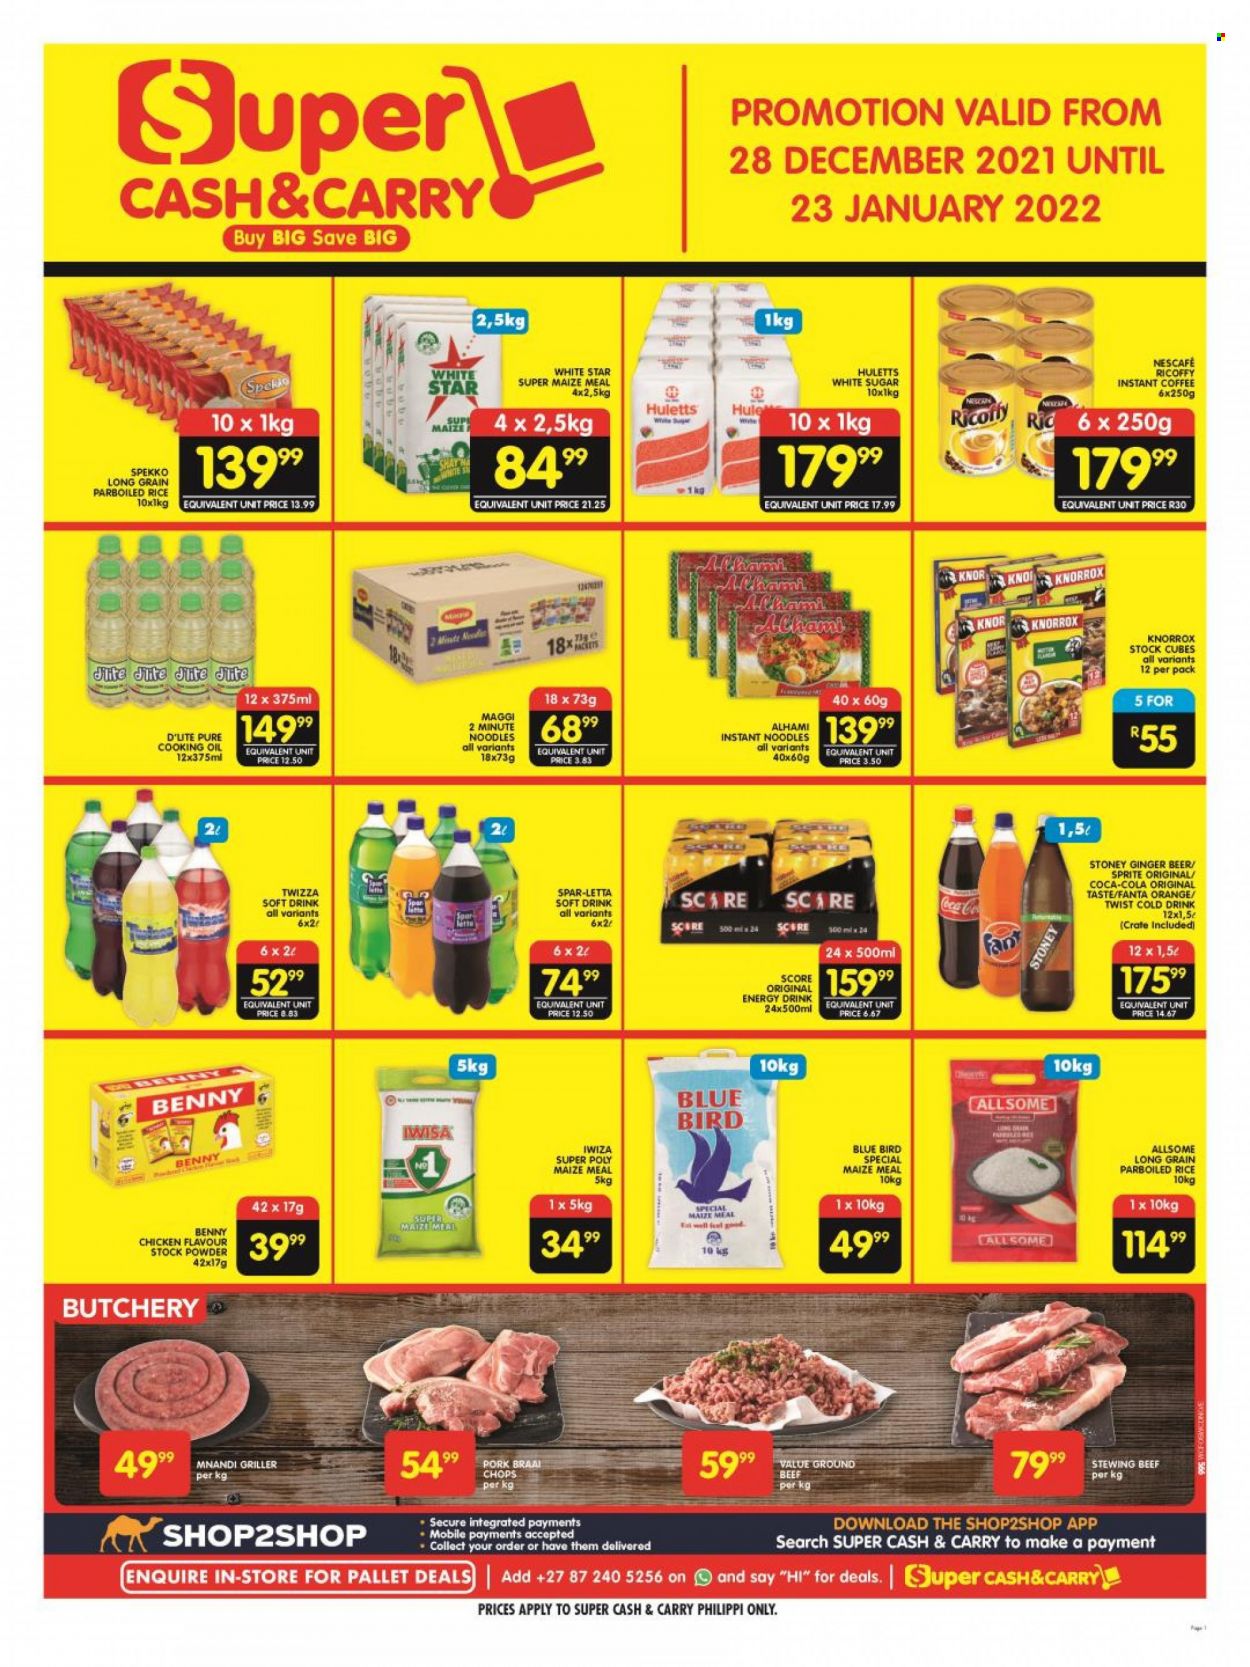 Shoprite catalogue  - 28/12/2021 - 23/01/2022 - Sales products - orange, instant noodles, noodles, sugar, Maggi, maize meal, Huletts, White Star, knorrox, rice, parboiled rice, Spekko, oil, Coca-Cola, Sprite, Fanta, energy drink, soft drink, Spar-Letta, instant coffee, Ricoffy, Nescafé, beer, beef meat, stewing beef, crate, ginger beer. Page 1.